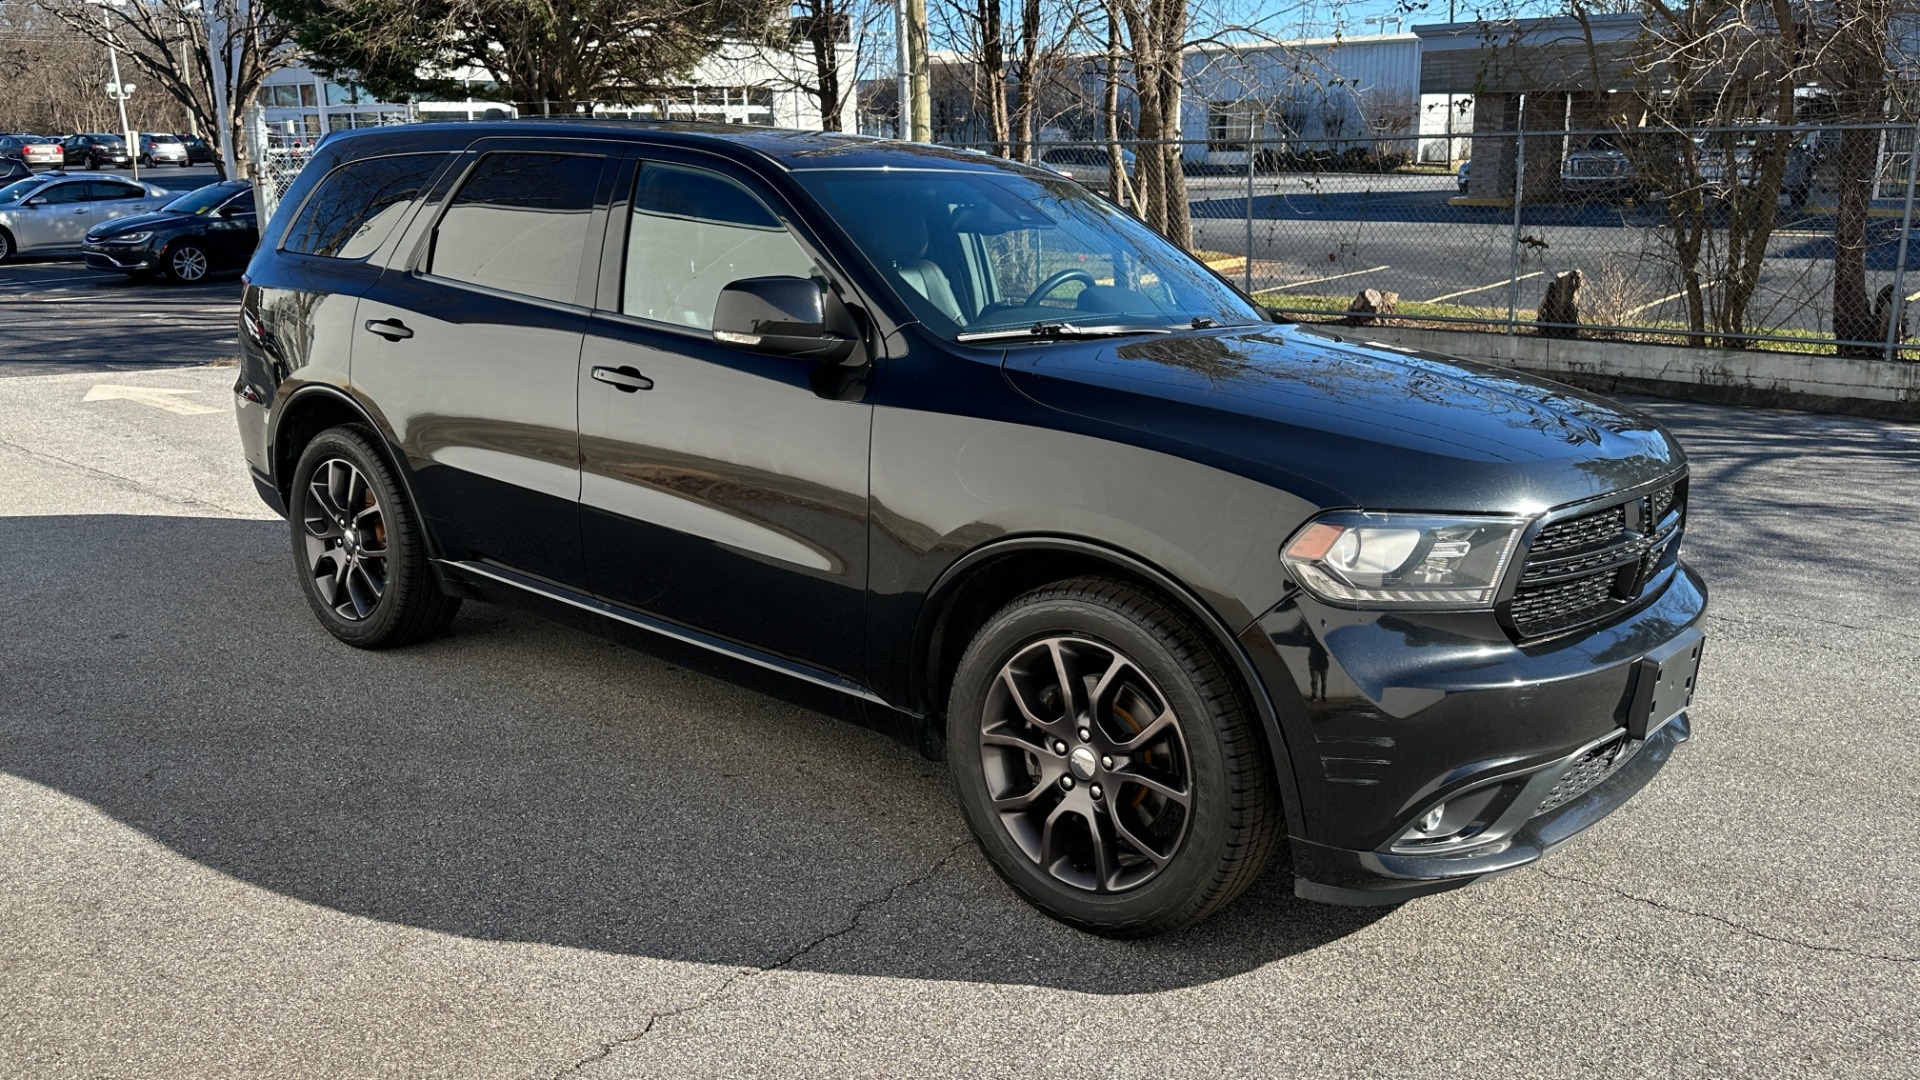 Used 2015 Dodge Durango R/T / HEMI V8 / CAPTAINS CHAIRS / 3 ROW SEATING / TECH PKG / NAPPA LEATHER  for sale $23,995 at Formula Imports in Charlotte NC 28227 6